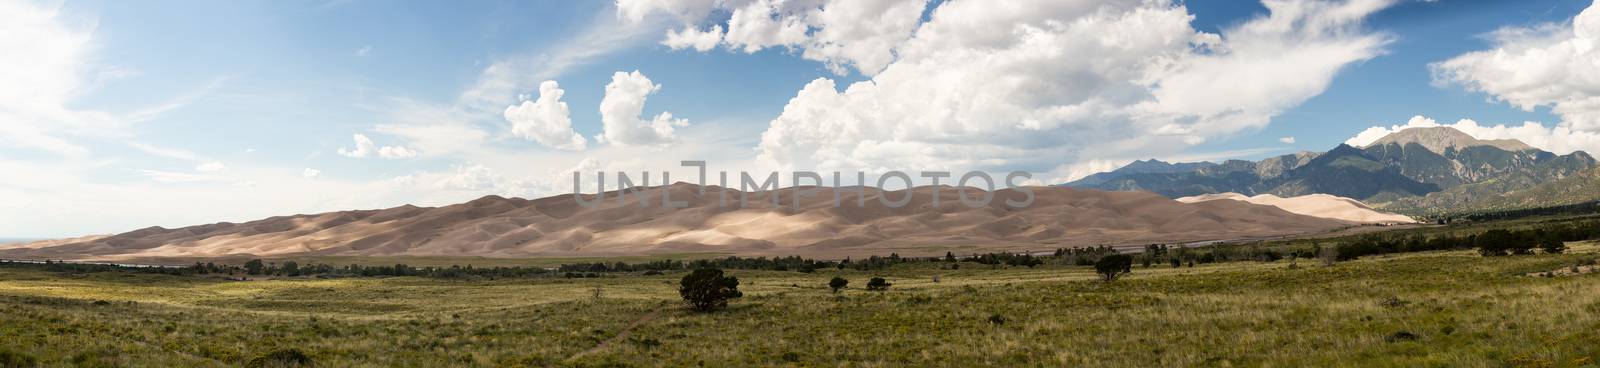 Wide high resolution stitched panorama of the dunes at Great Sand Dunes National Park in Colorado with the mountains behind. Unusual to see clouds over the sand